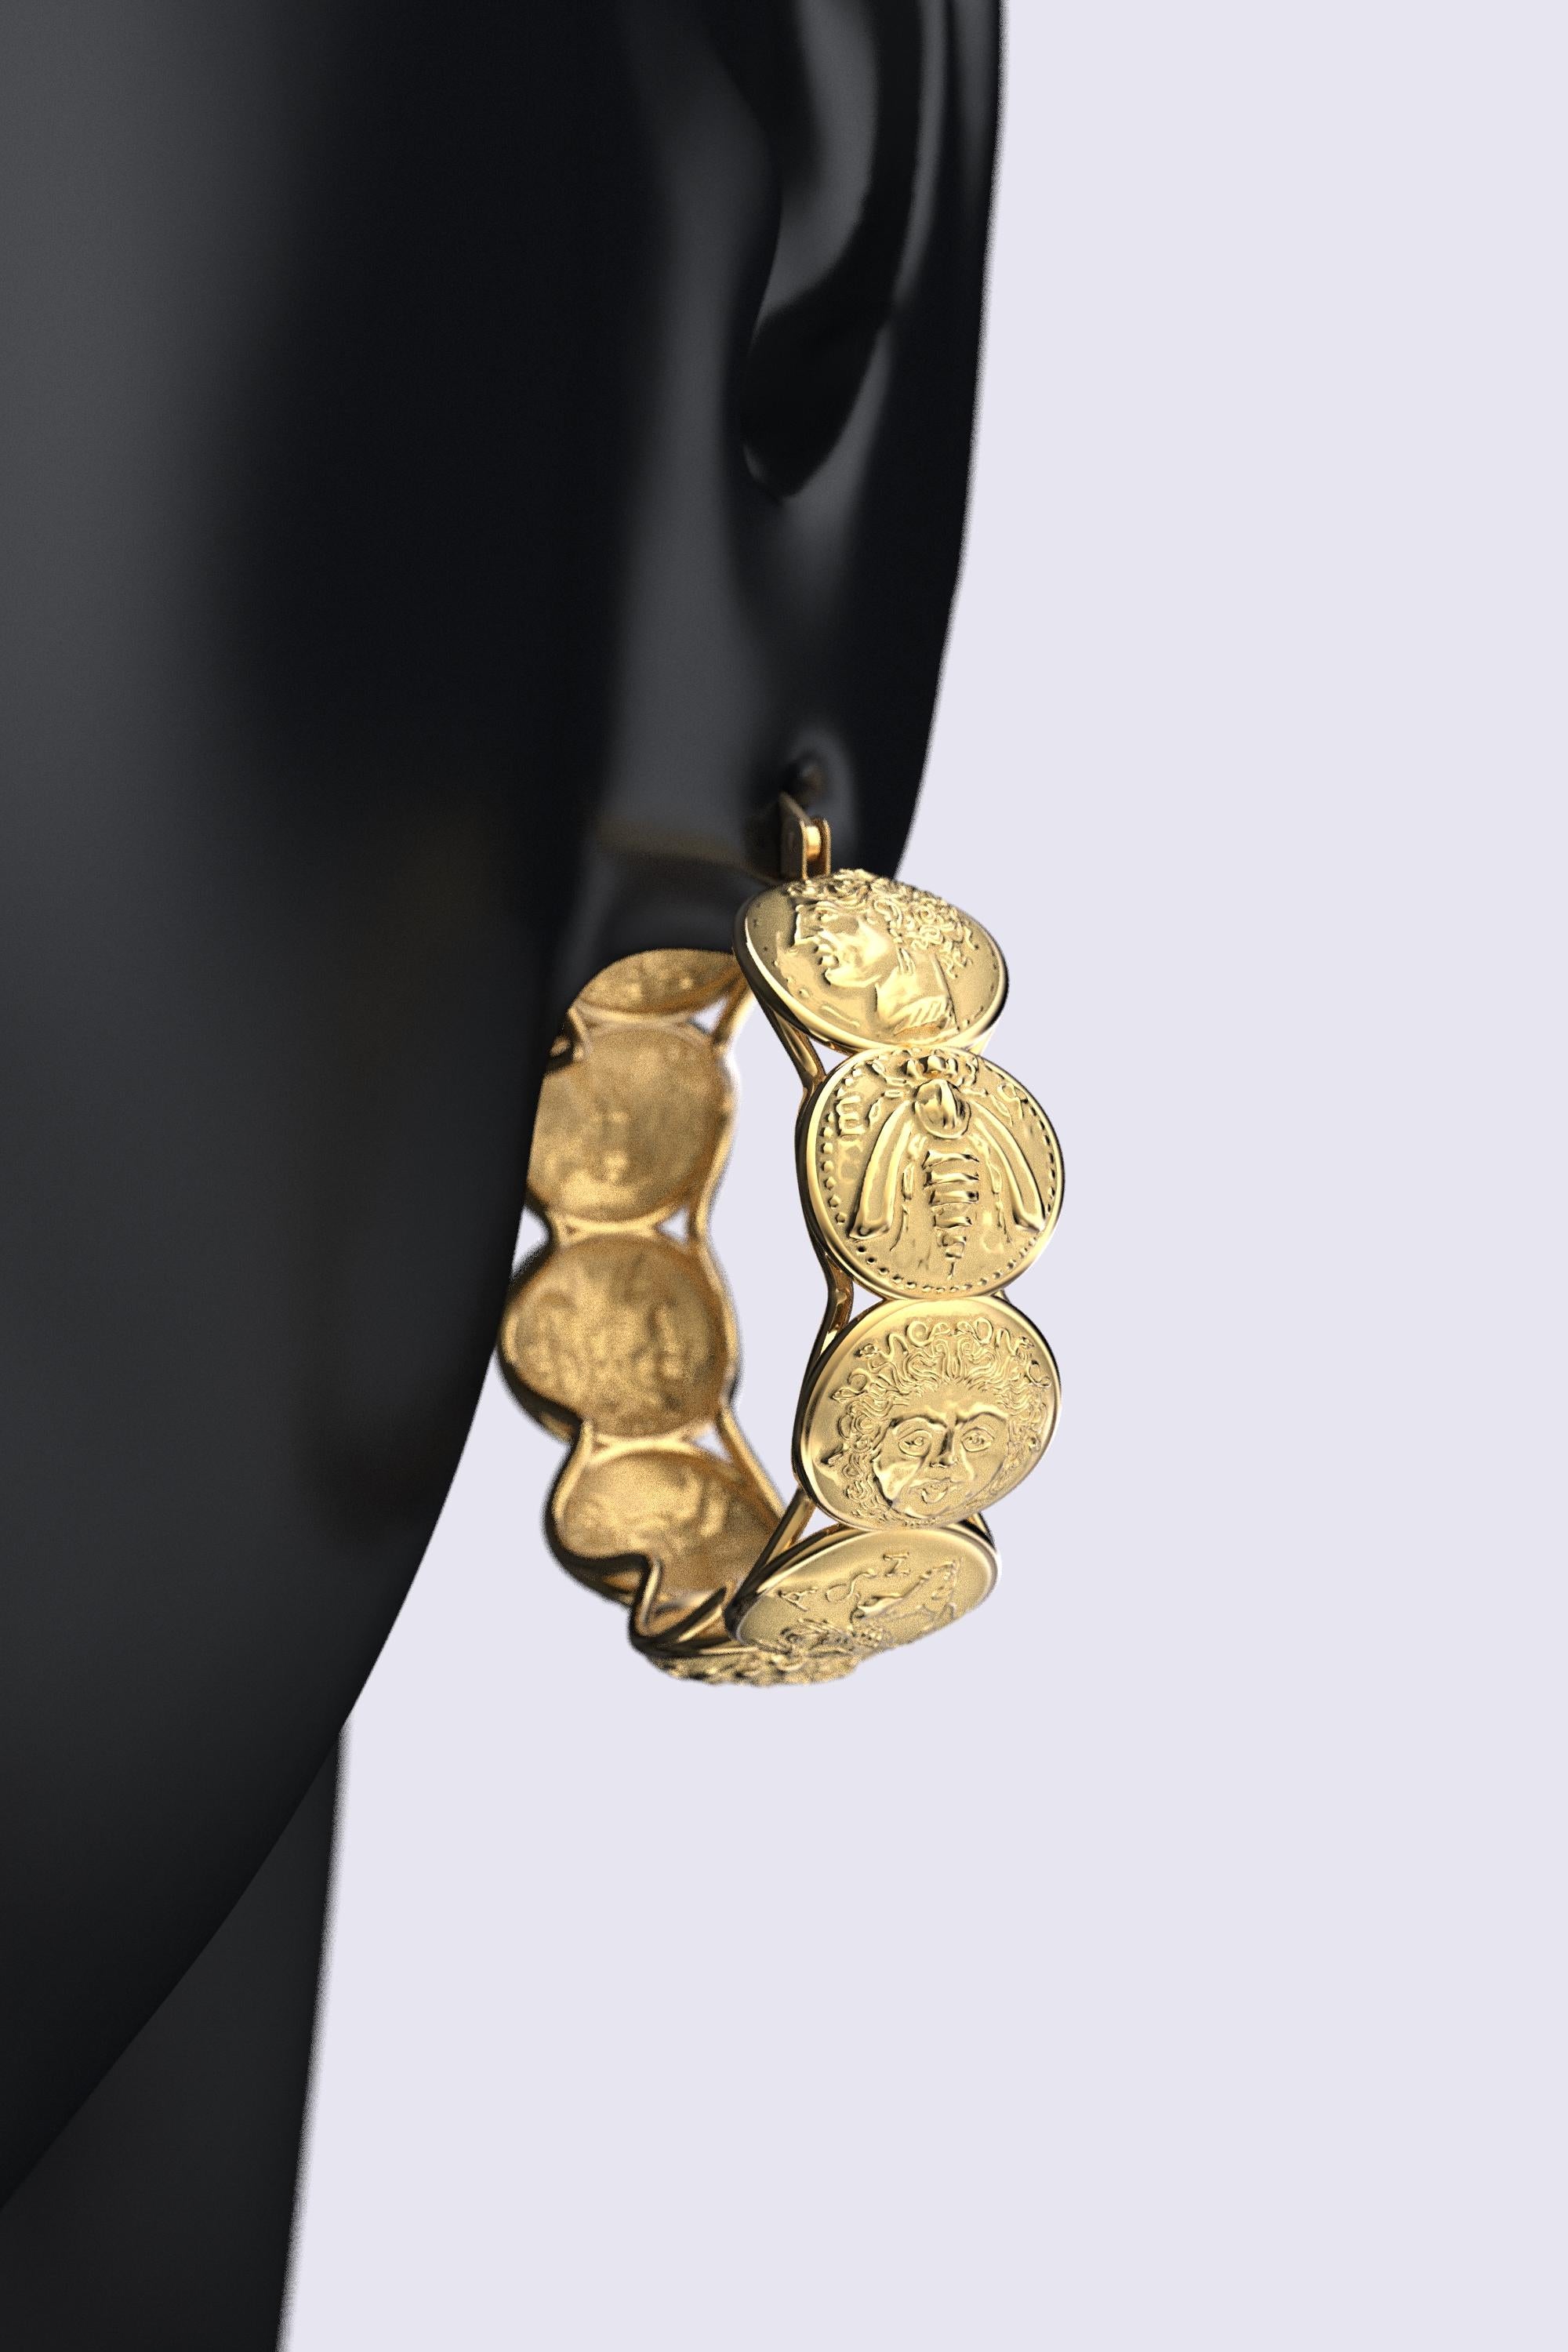 Classical Greek 14k Gold hoop earrings inspired by ancient Greek coins, only made to order. For Sale